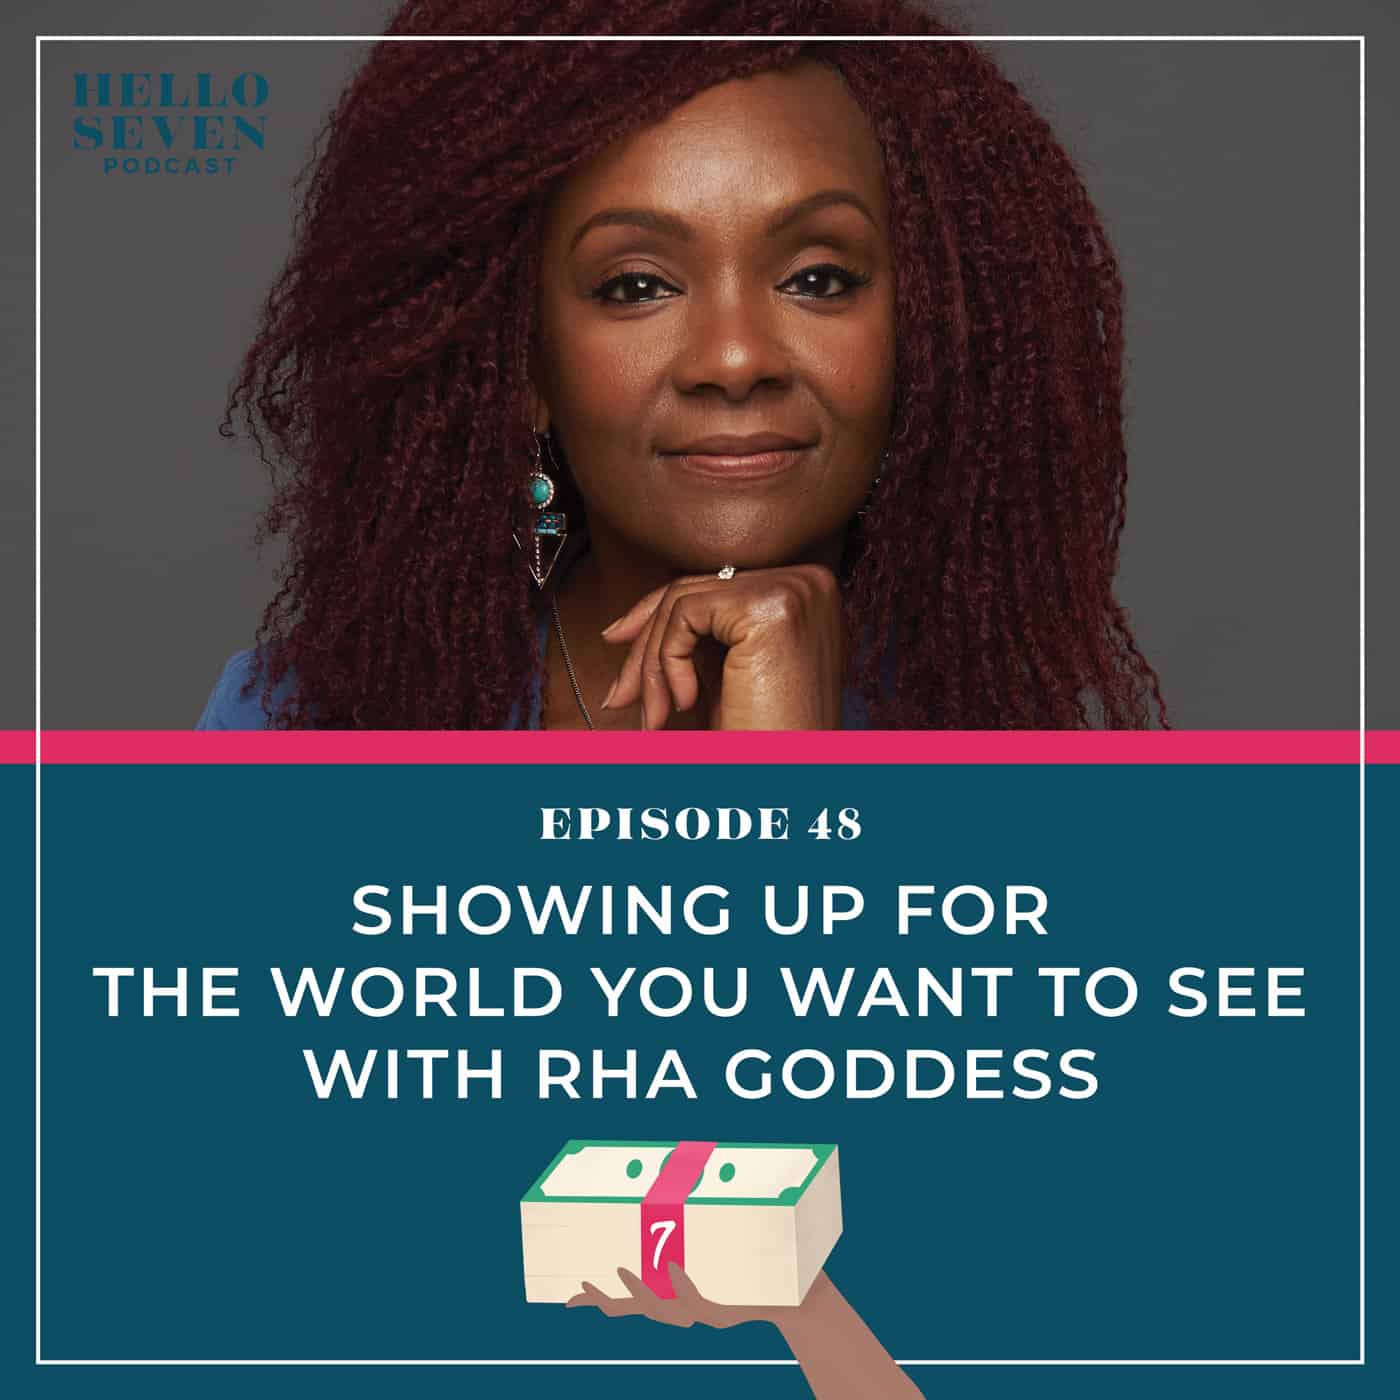 Showing Up for the World You Want to See with Rha Goddess